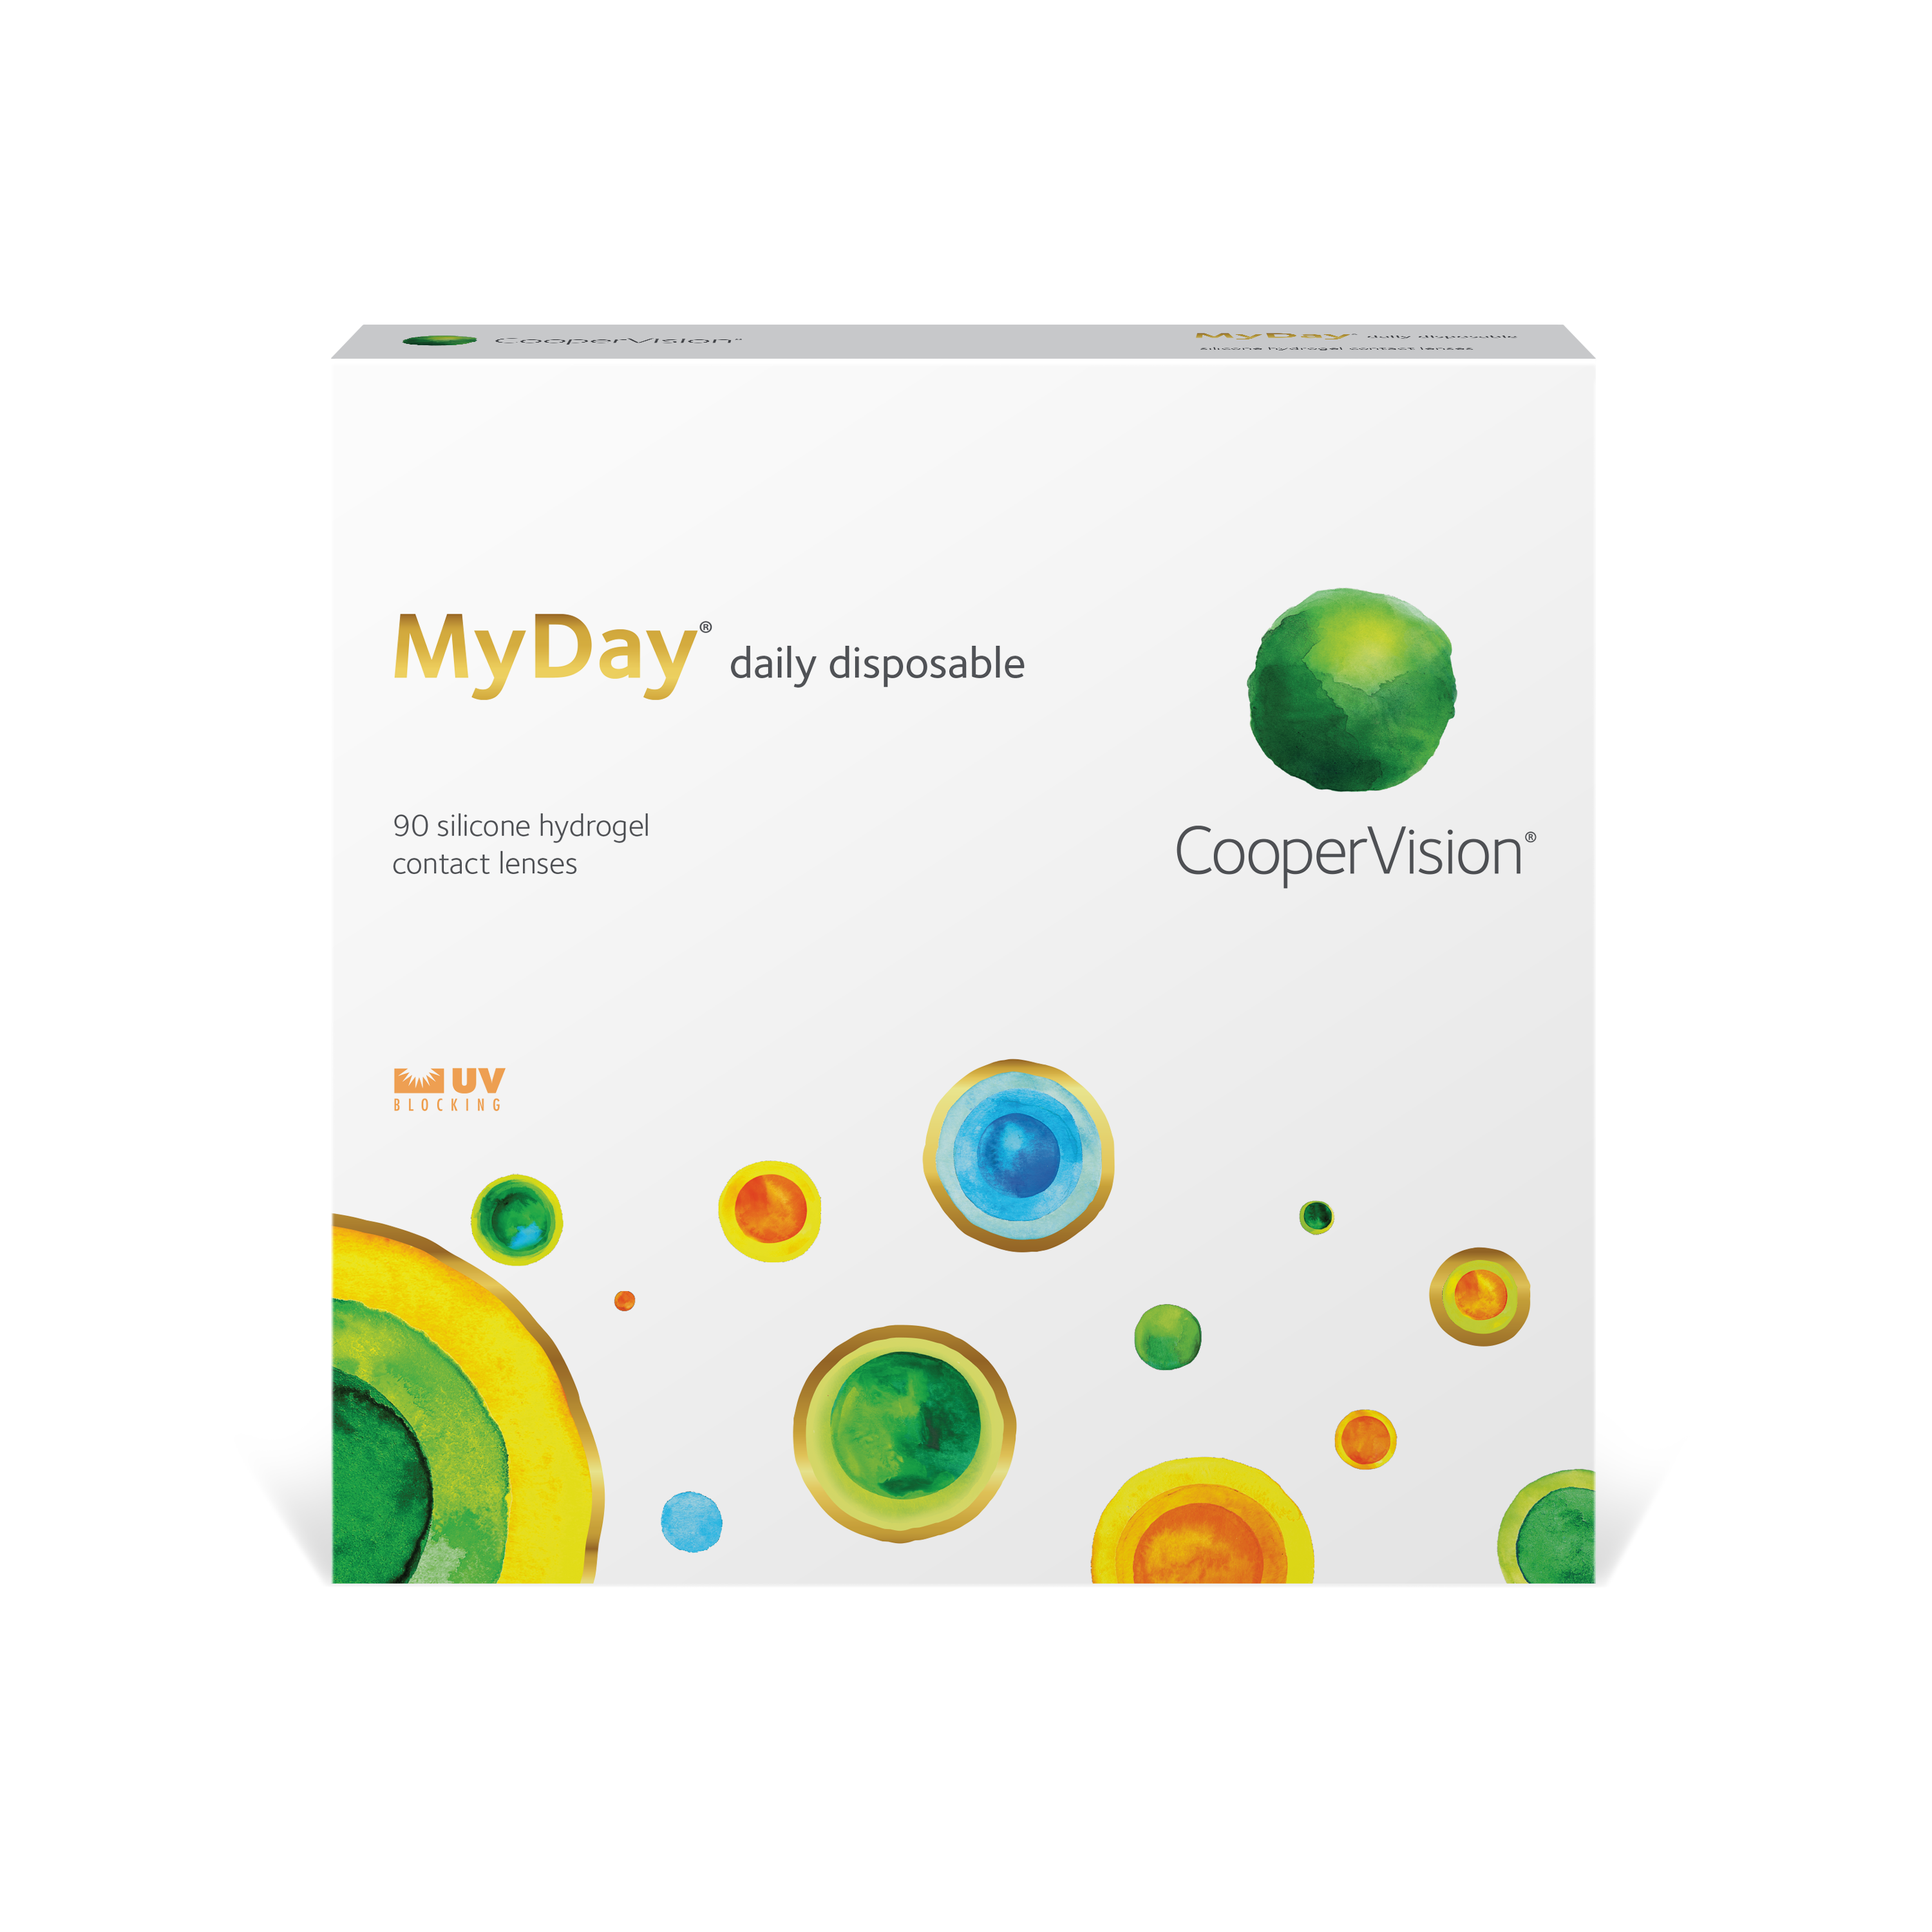 MyDay® daily disposable lenses